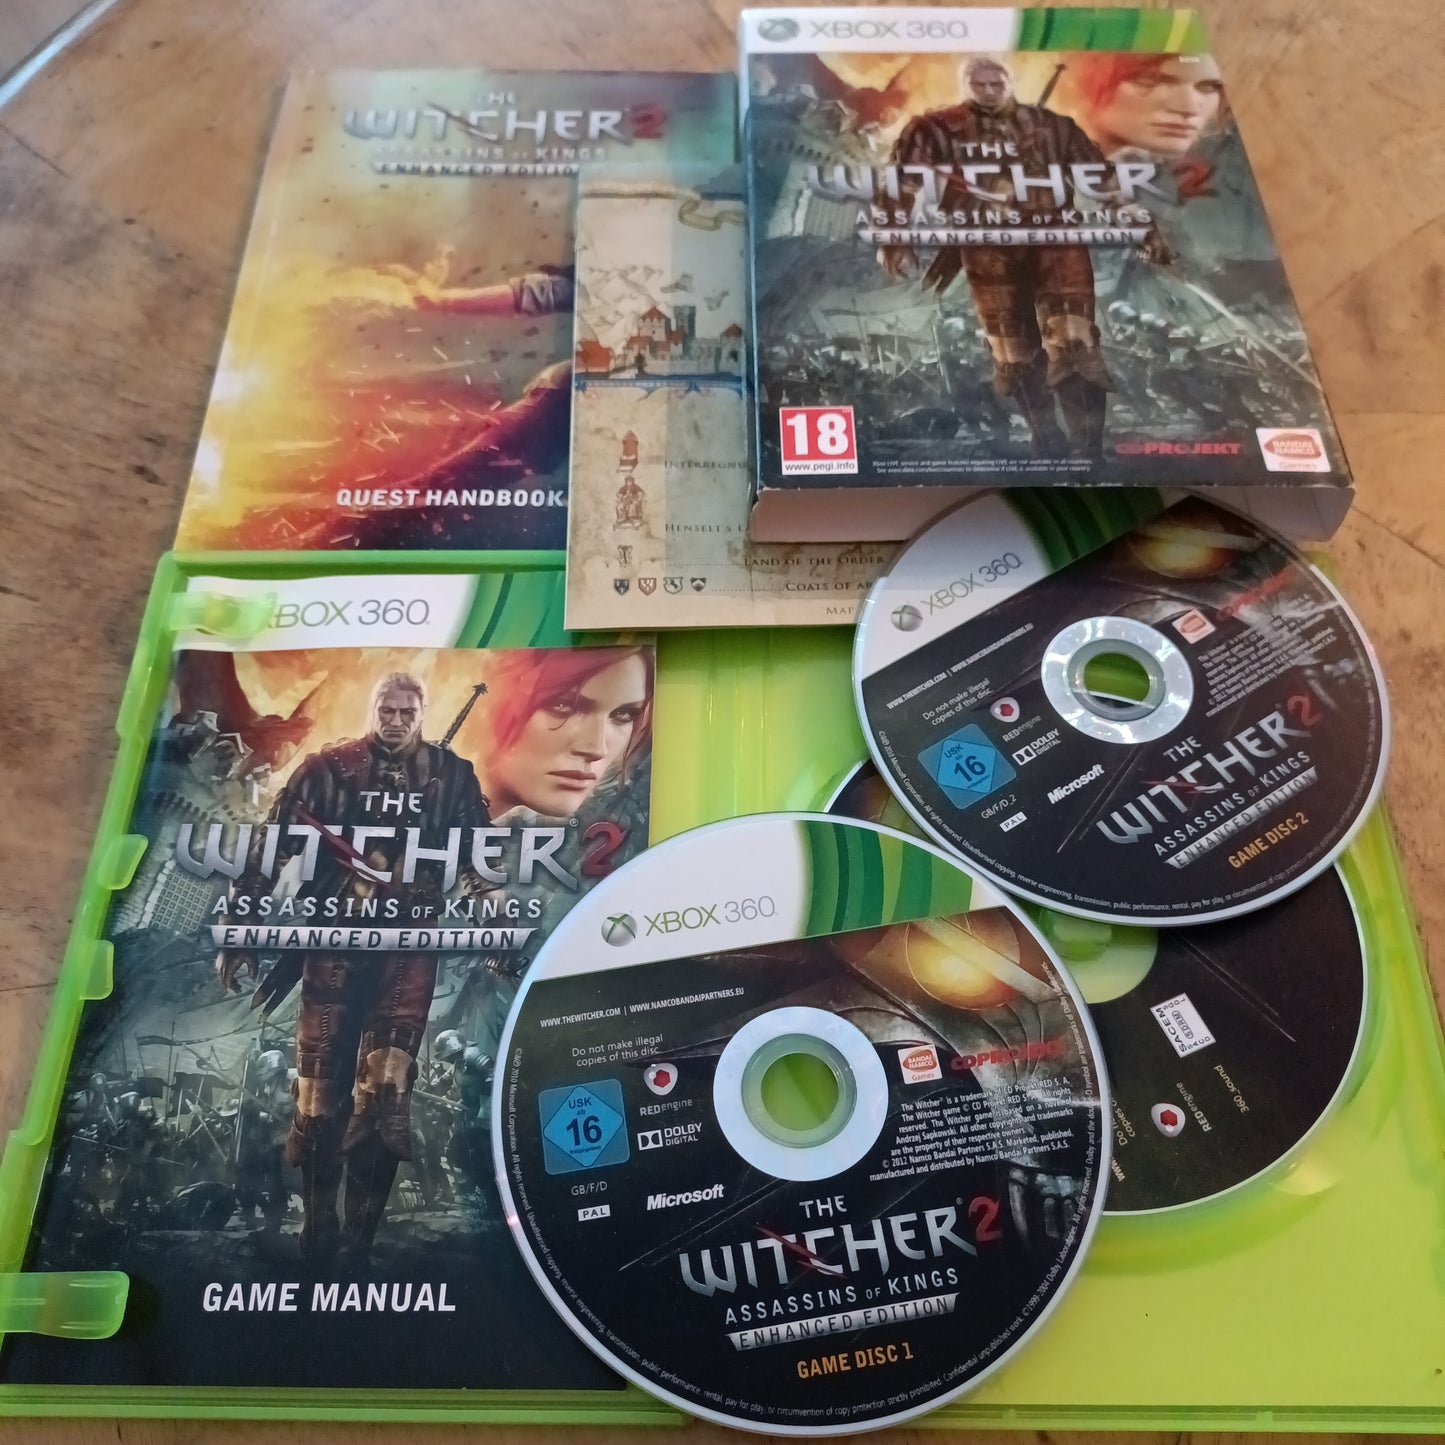 The Witcher 2 -  Assassins of Kings Enhanced Edition - Xbox 360